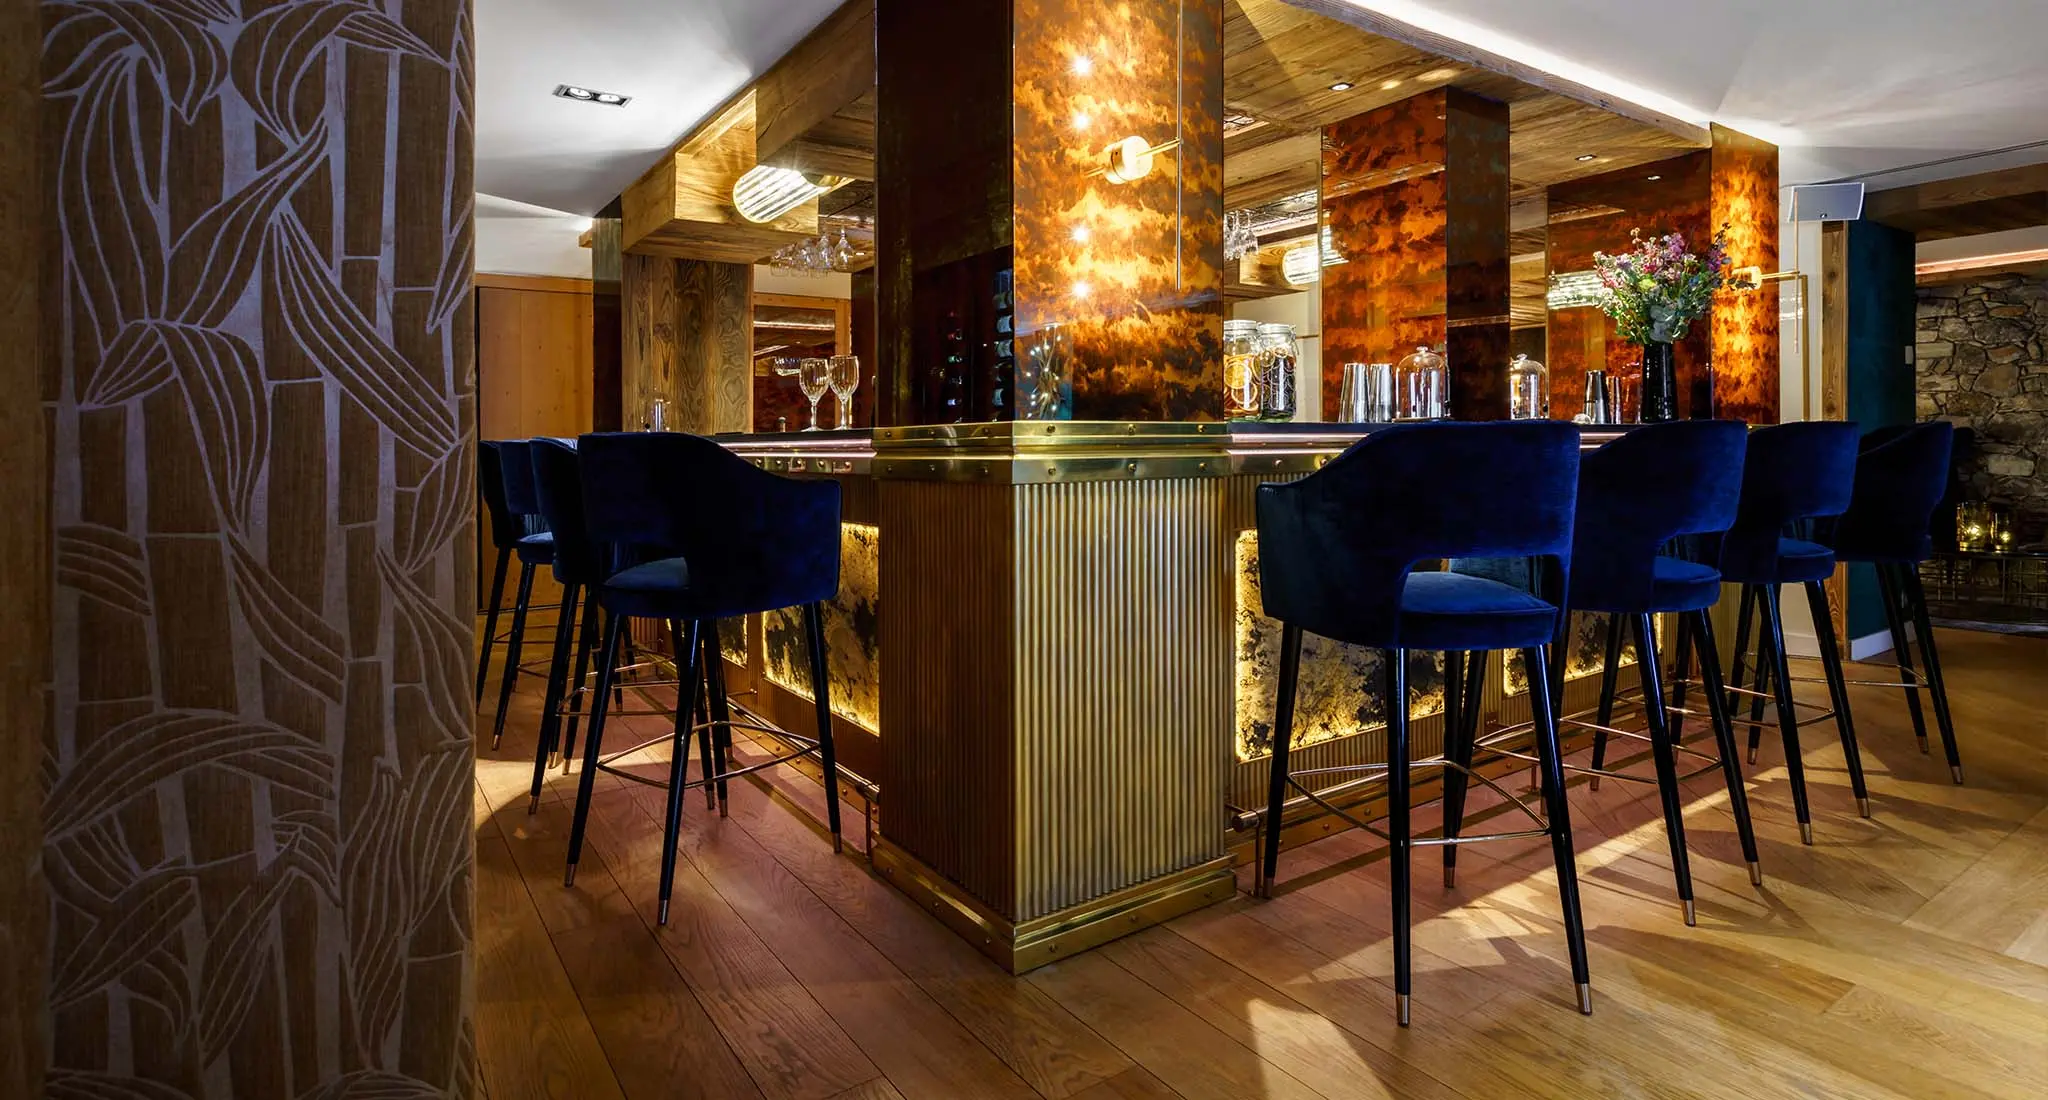 Blue chairs with gold accents arranged in a bar at LA SIVOLIÈRE hotel in France, showcasing the supplied furniture's elegant design.